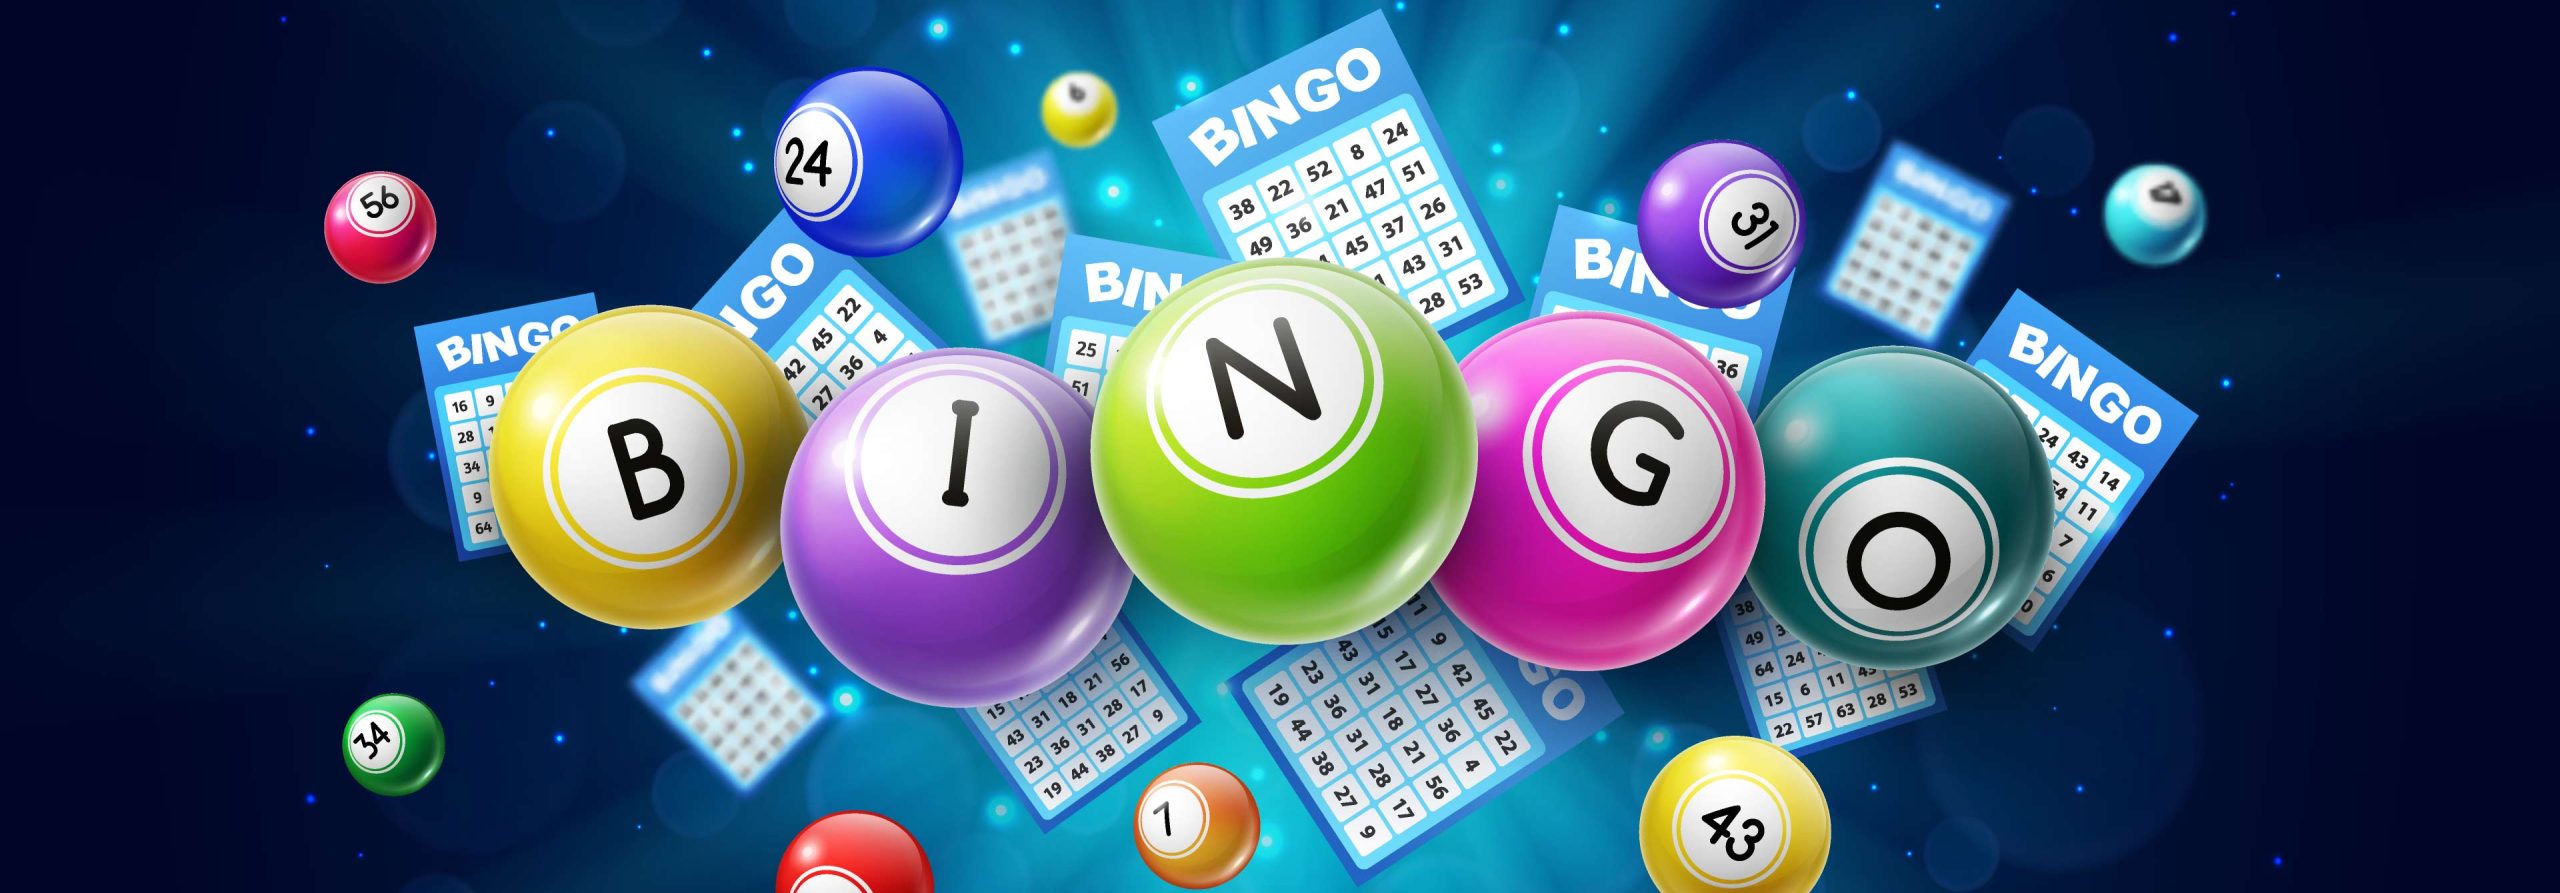 Innovative Trends and Predictions for the Future of Online Bingo